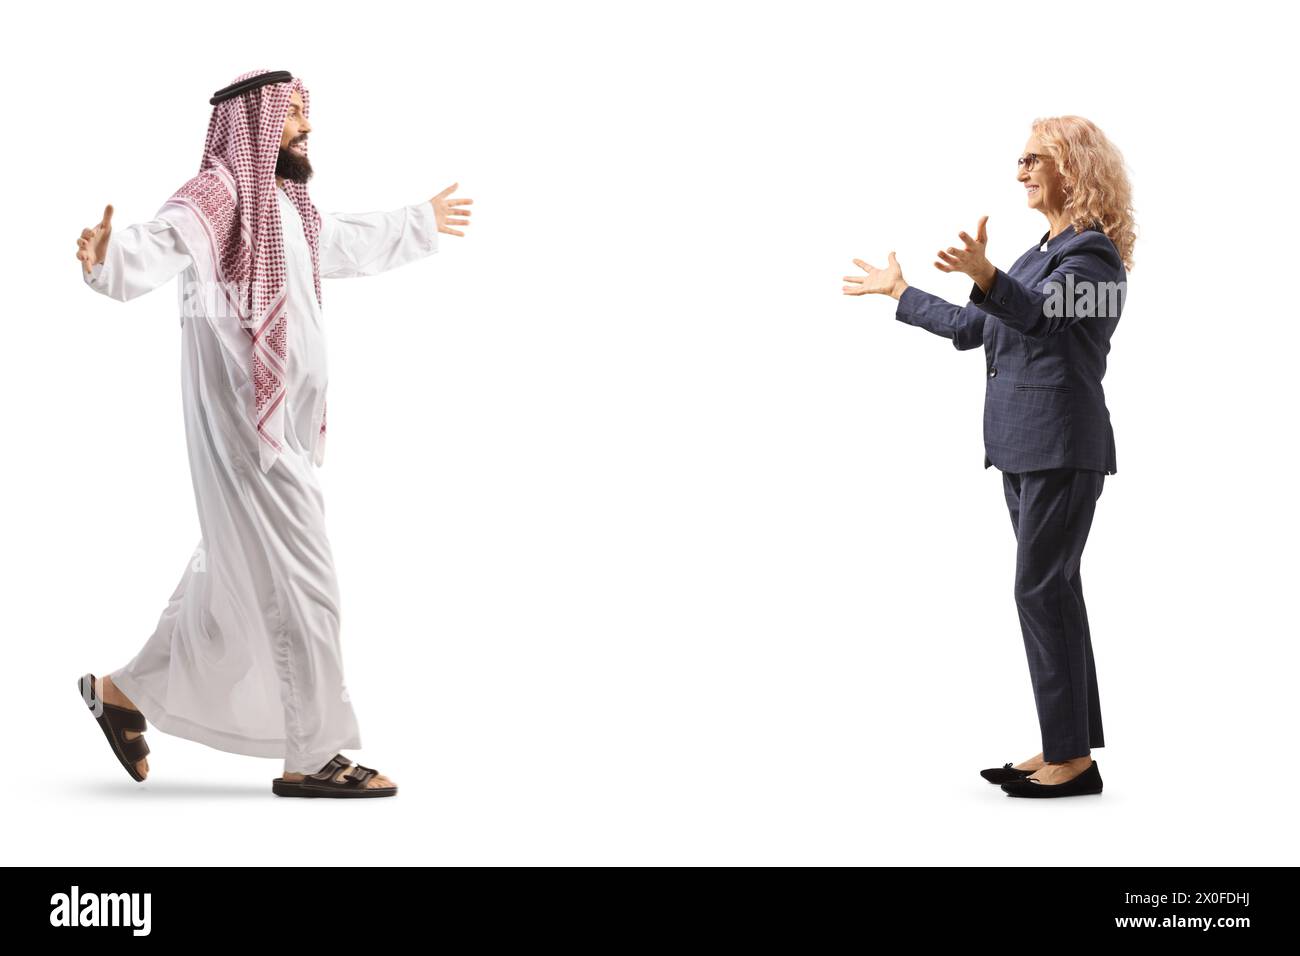 Full length profile shot of a saudi arab man meeting a woman isolated on white background Stock Photo